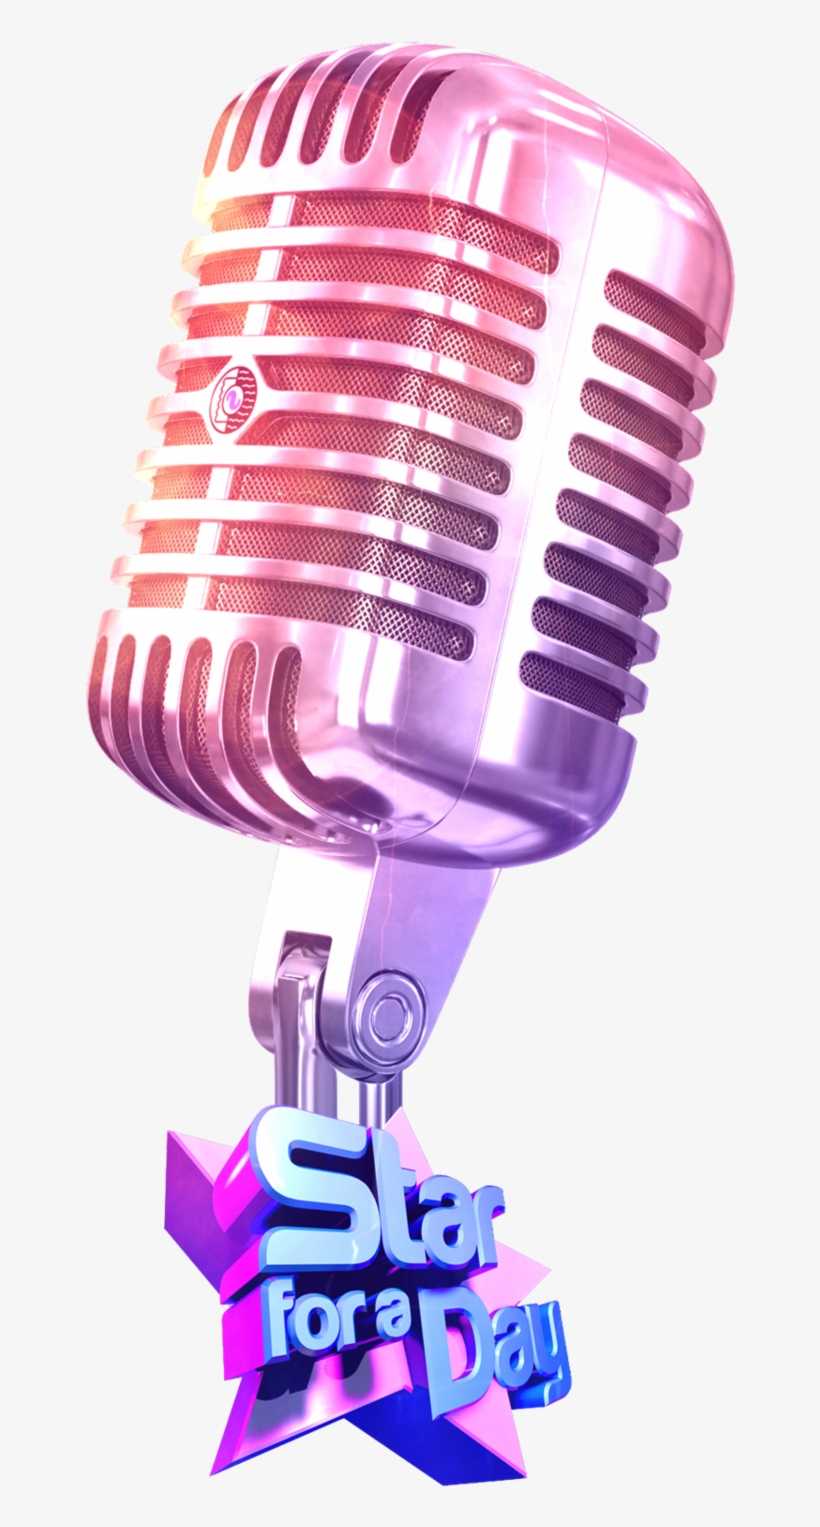 Studio Microphone Png Download - February Releases Ep 2013 - Various - Download, transparent png #3997410